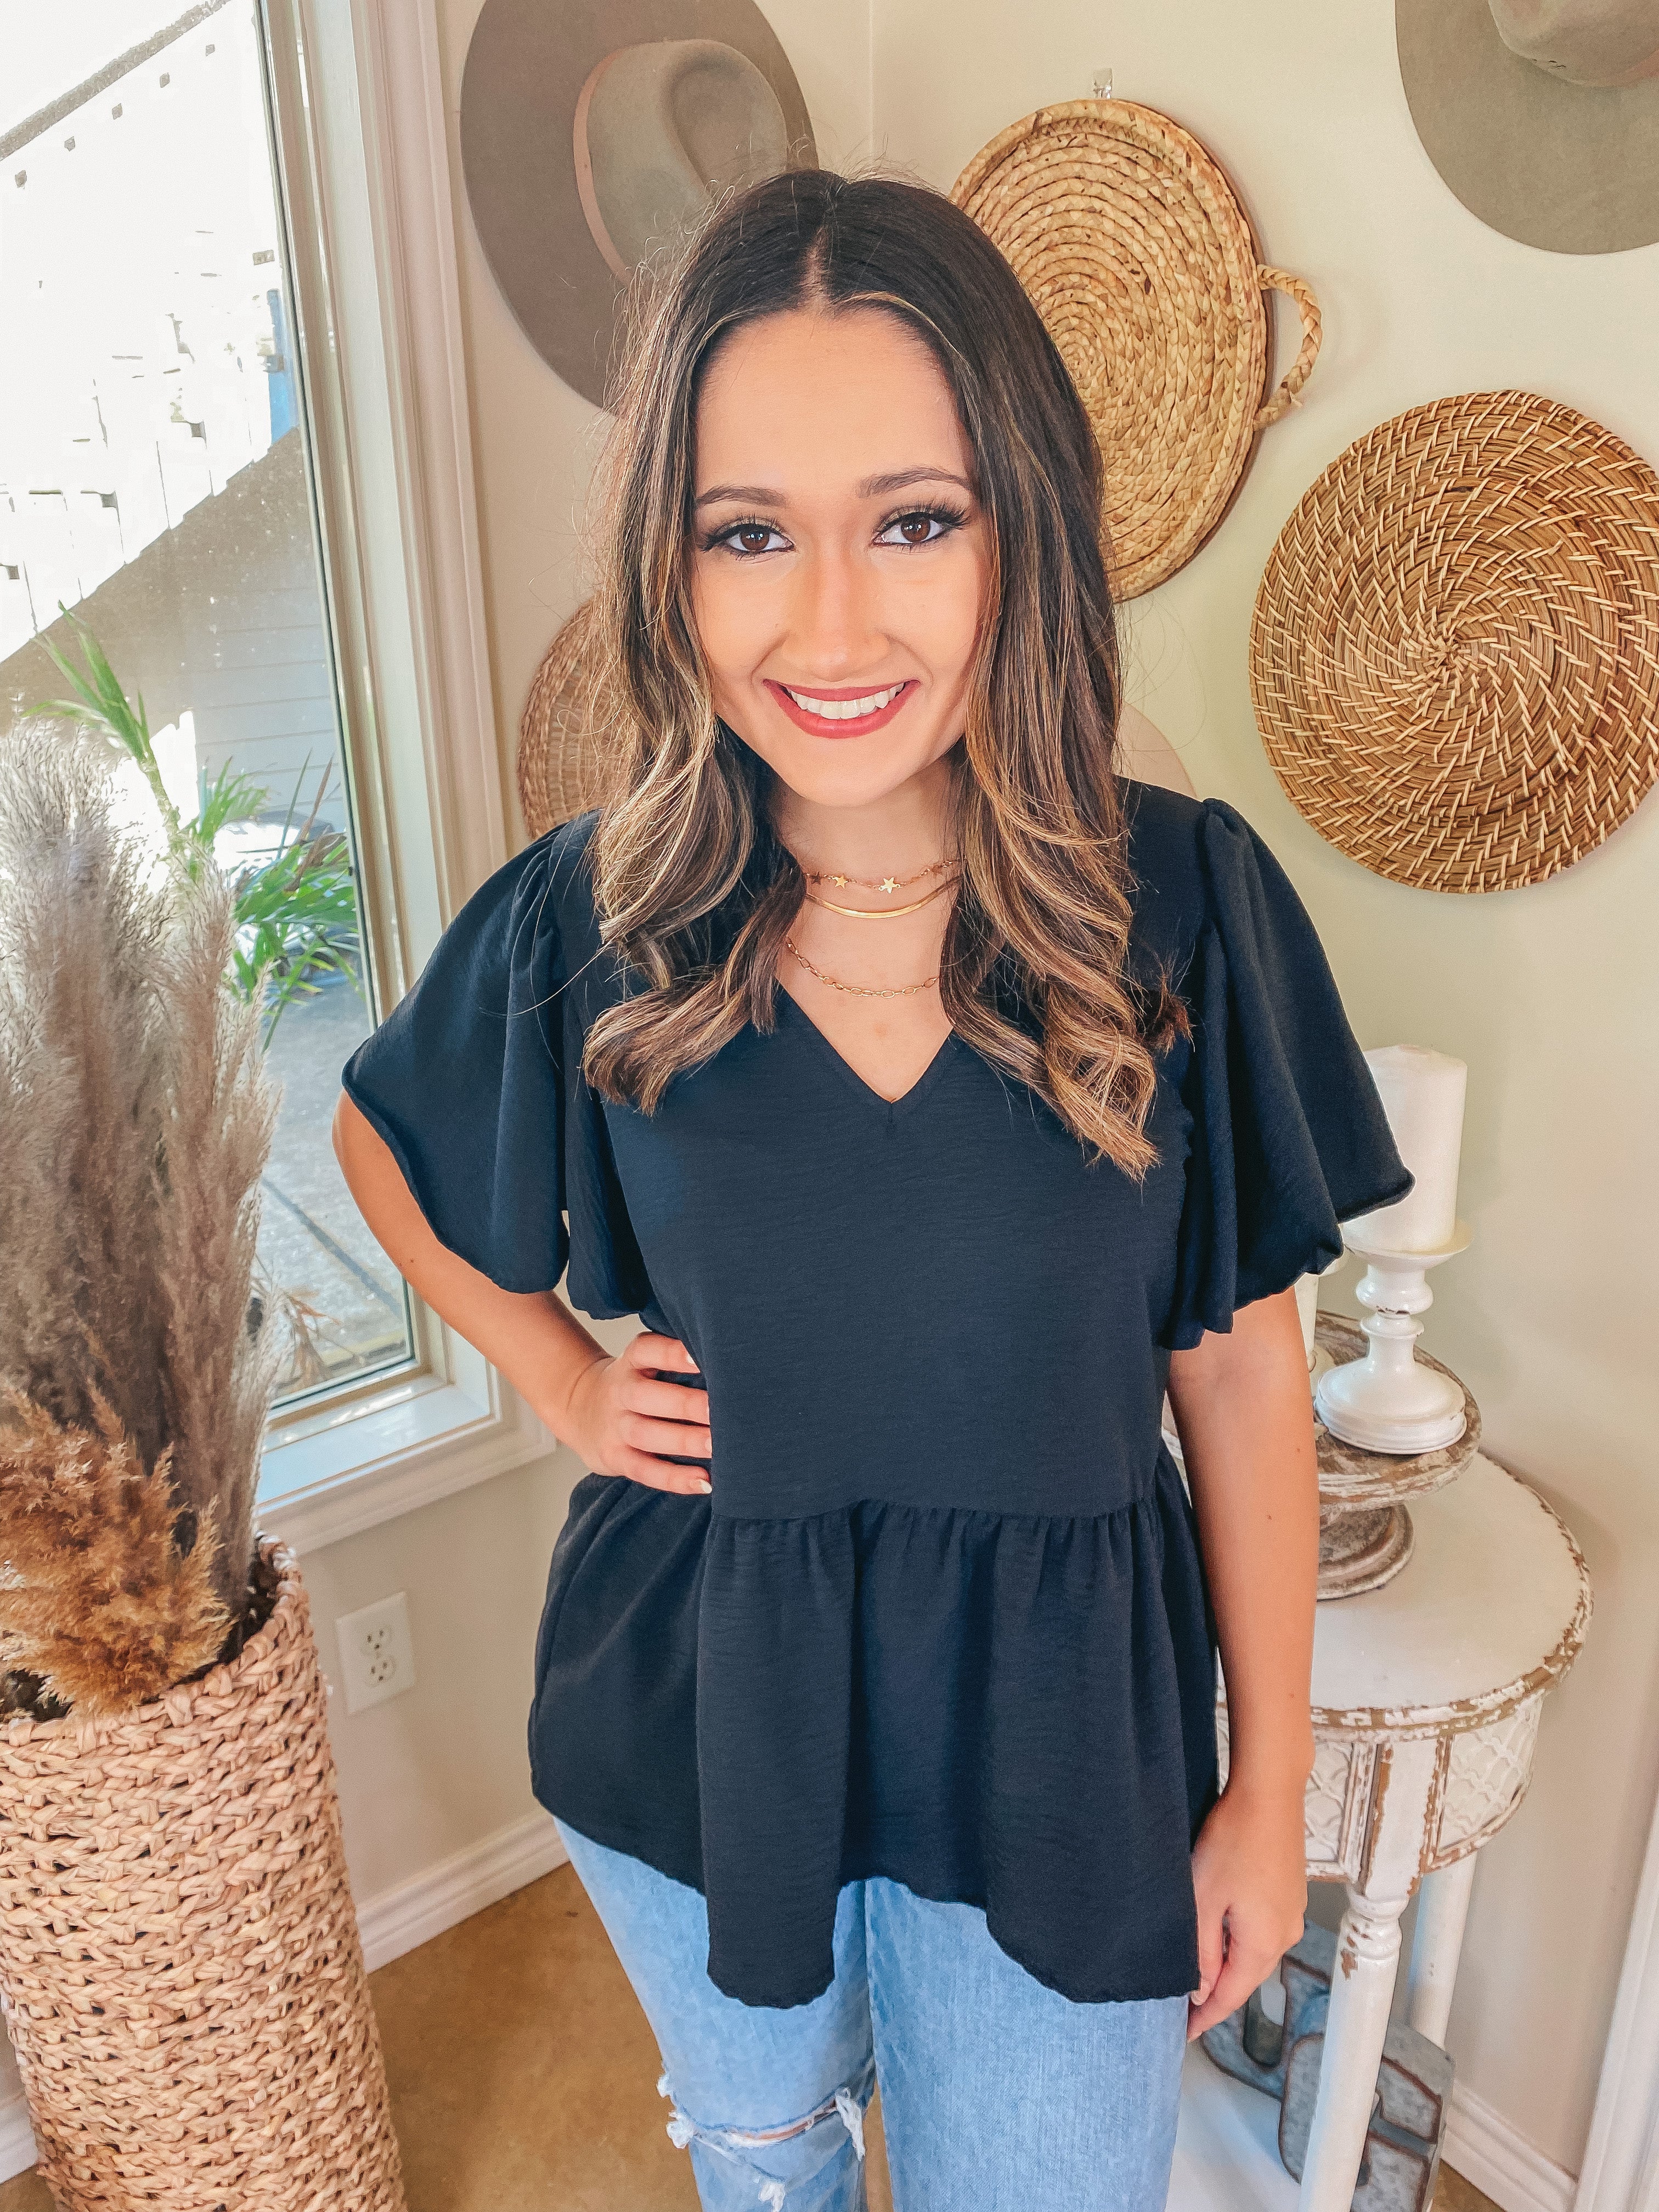 Everything You Need Ruffle Short Sleeve Peplum Top in Black - Giddy Up Glamour Boutique